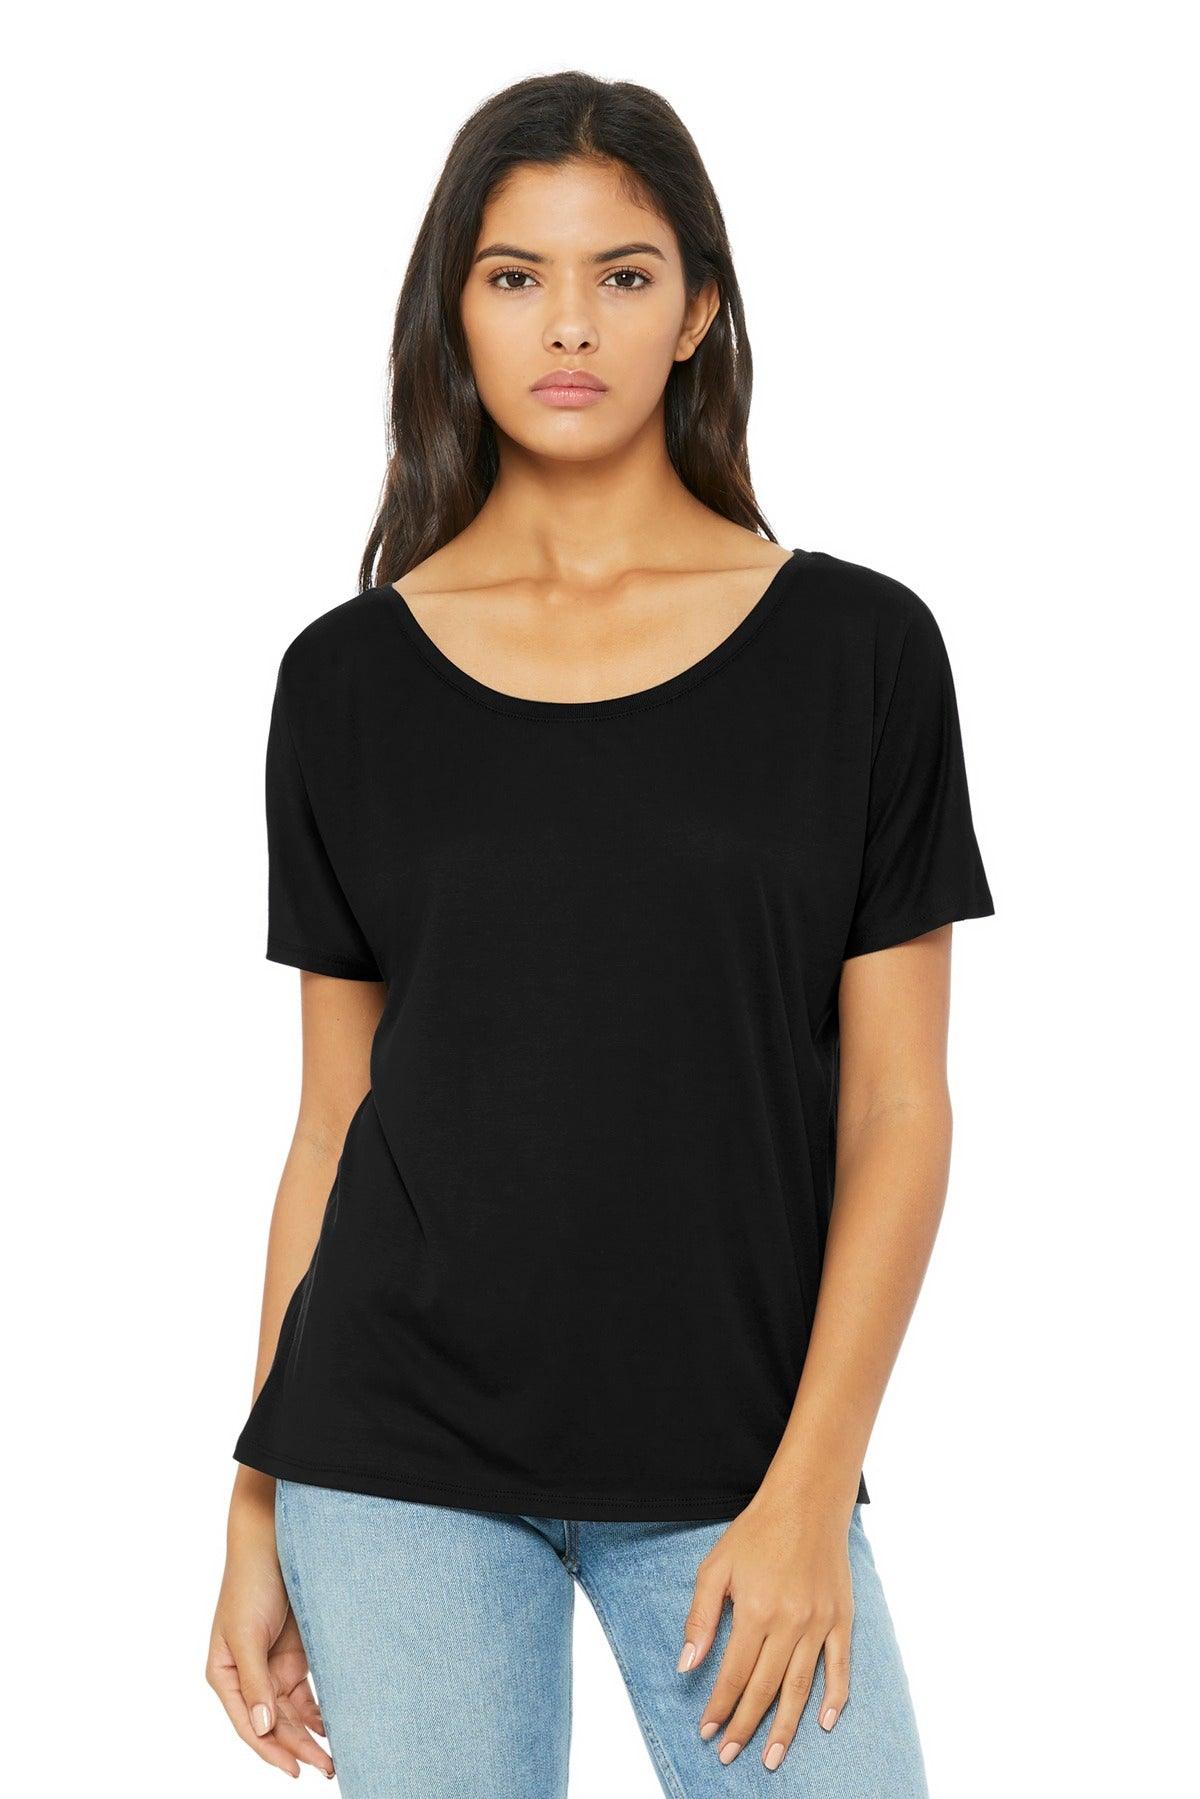 BELLA+CANVAS Women's Slouchy Tee. BC8816 - Dresses Max